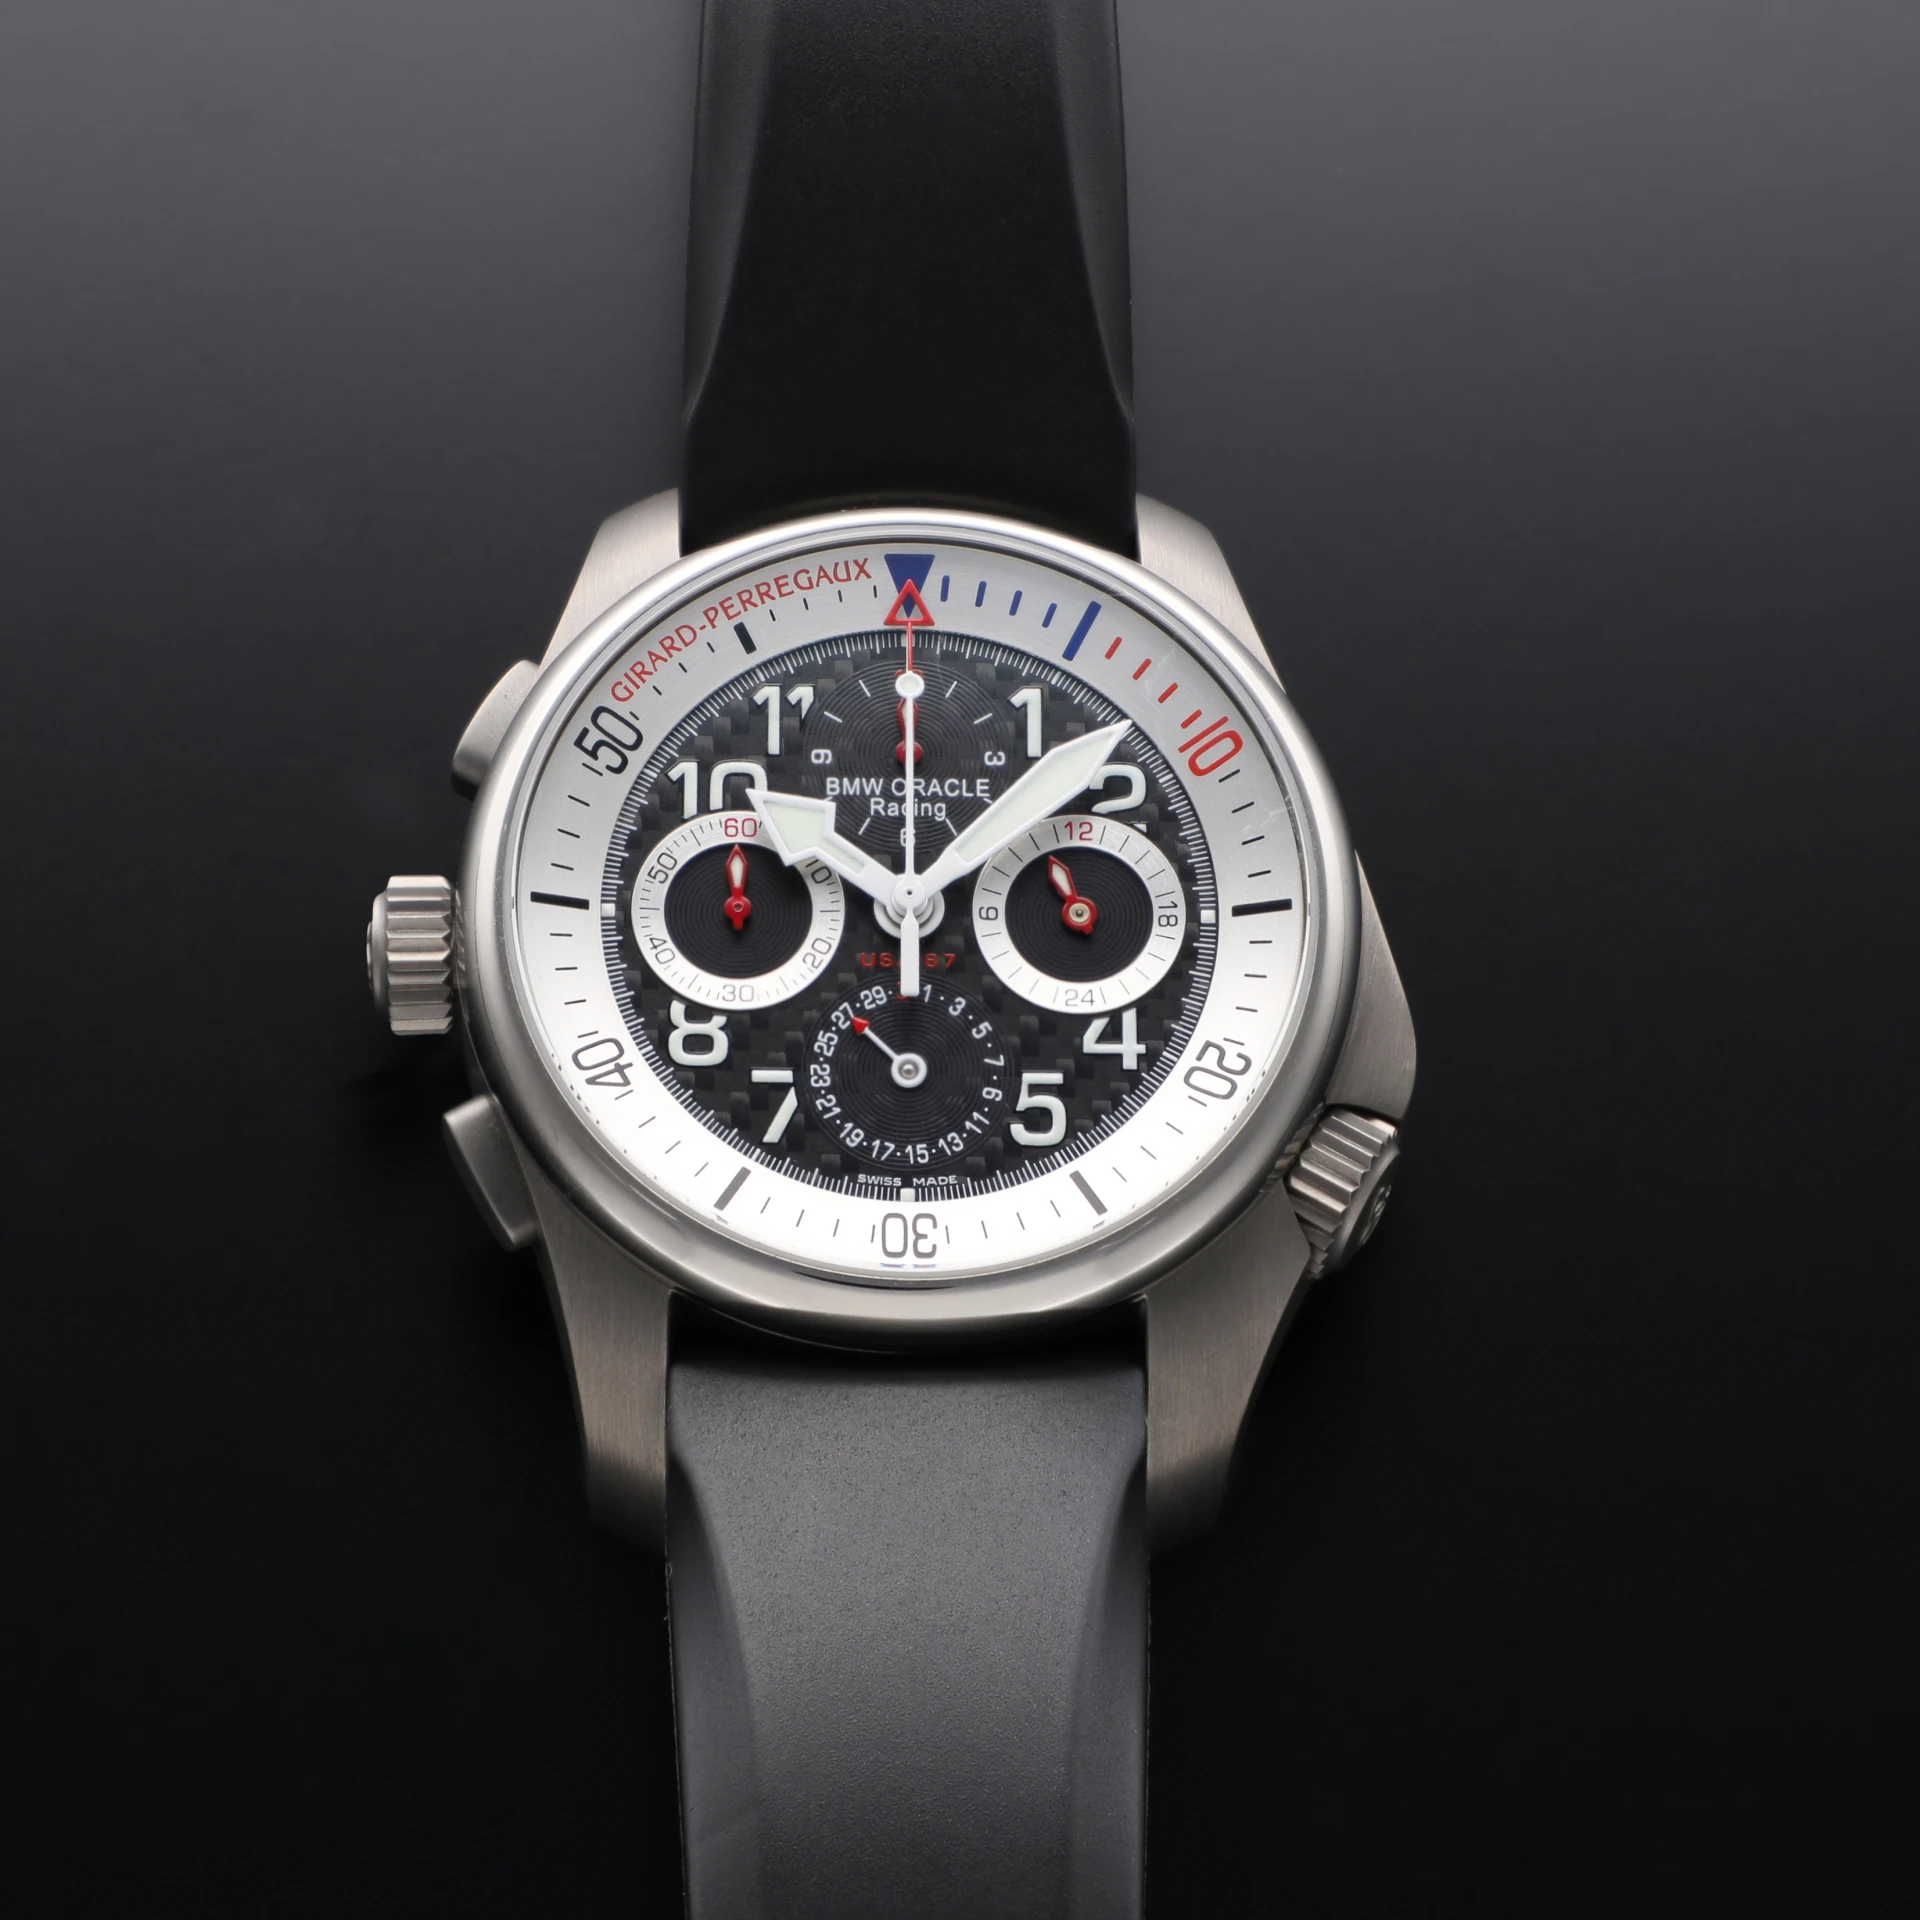 Girard-Perregaux BMW Oracle USA 87 Challenger of Record Titanium - Limited to 750 Pieces 49931-21-613-FK6A